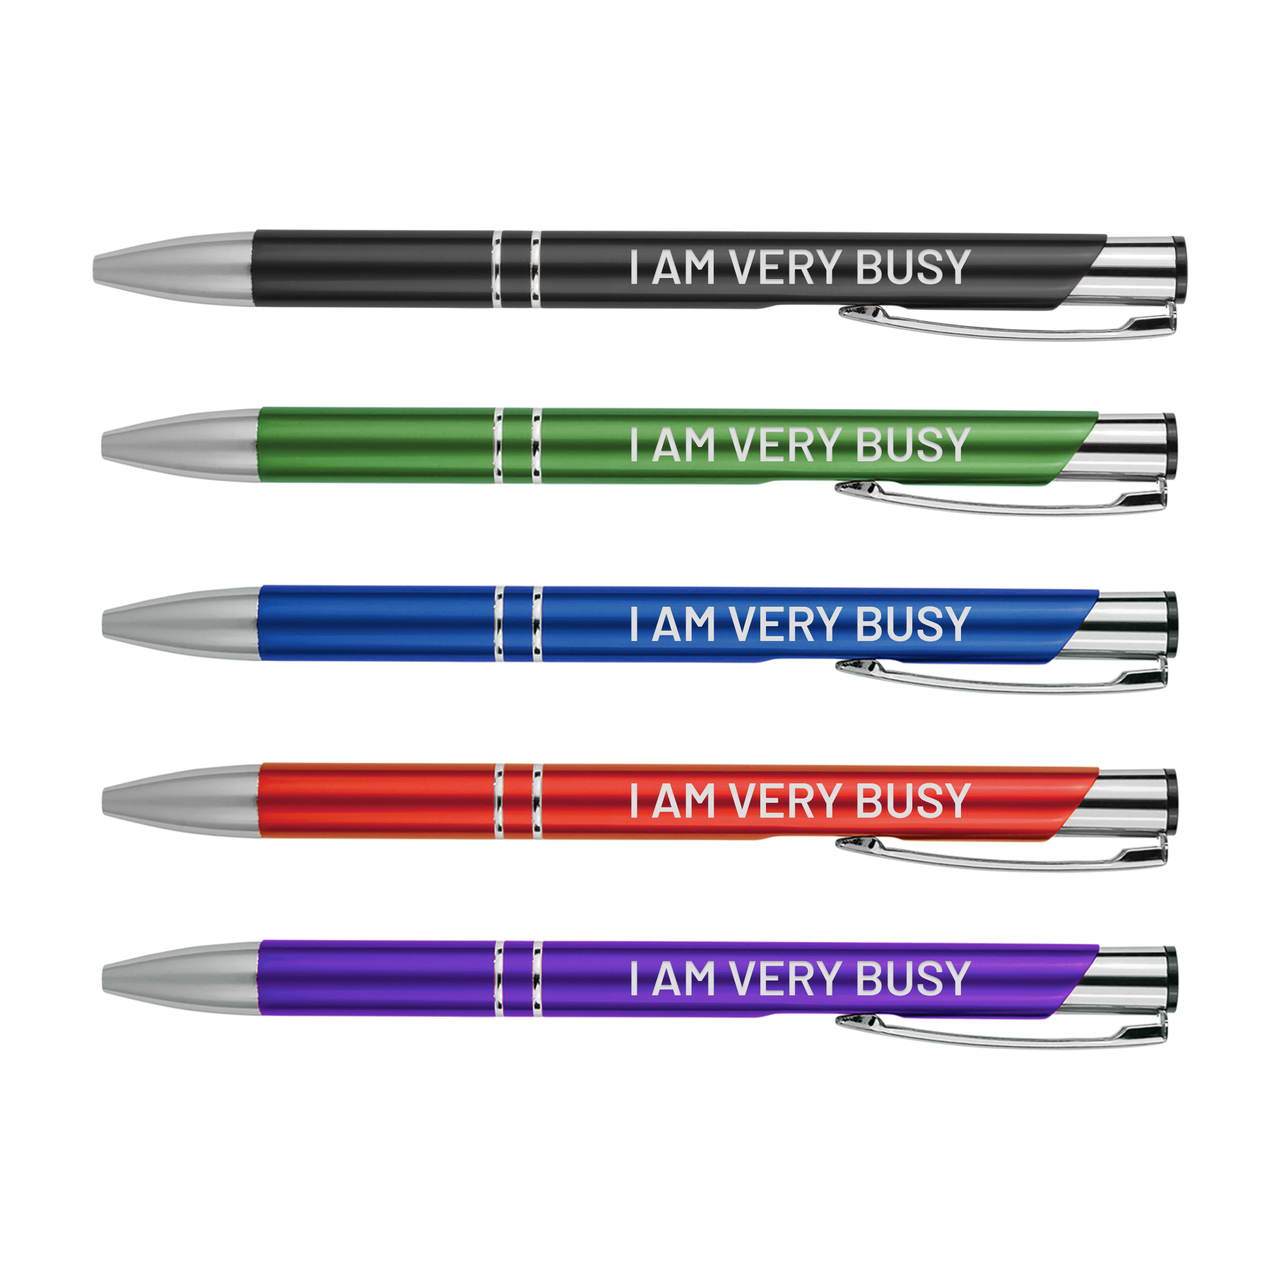 I Am Very Busy Metal Pens | Motivational Writing Tools Office Supplies Coworker Gifts Stocking Stuffer Baum Designs